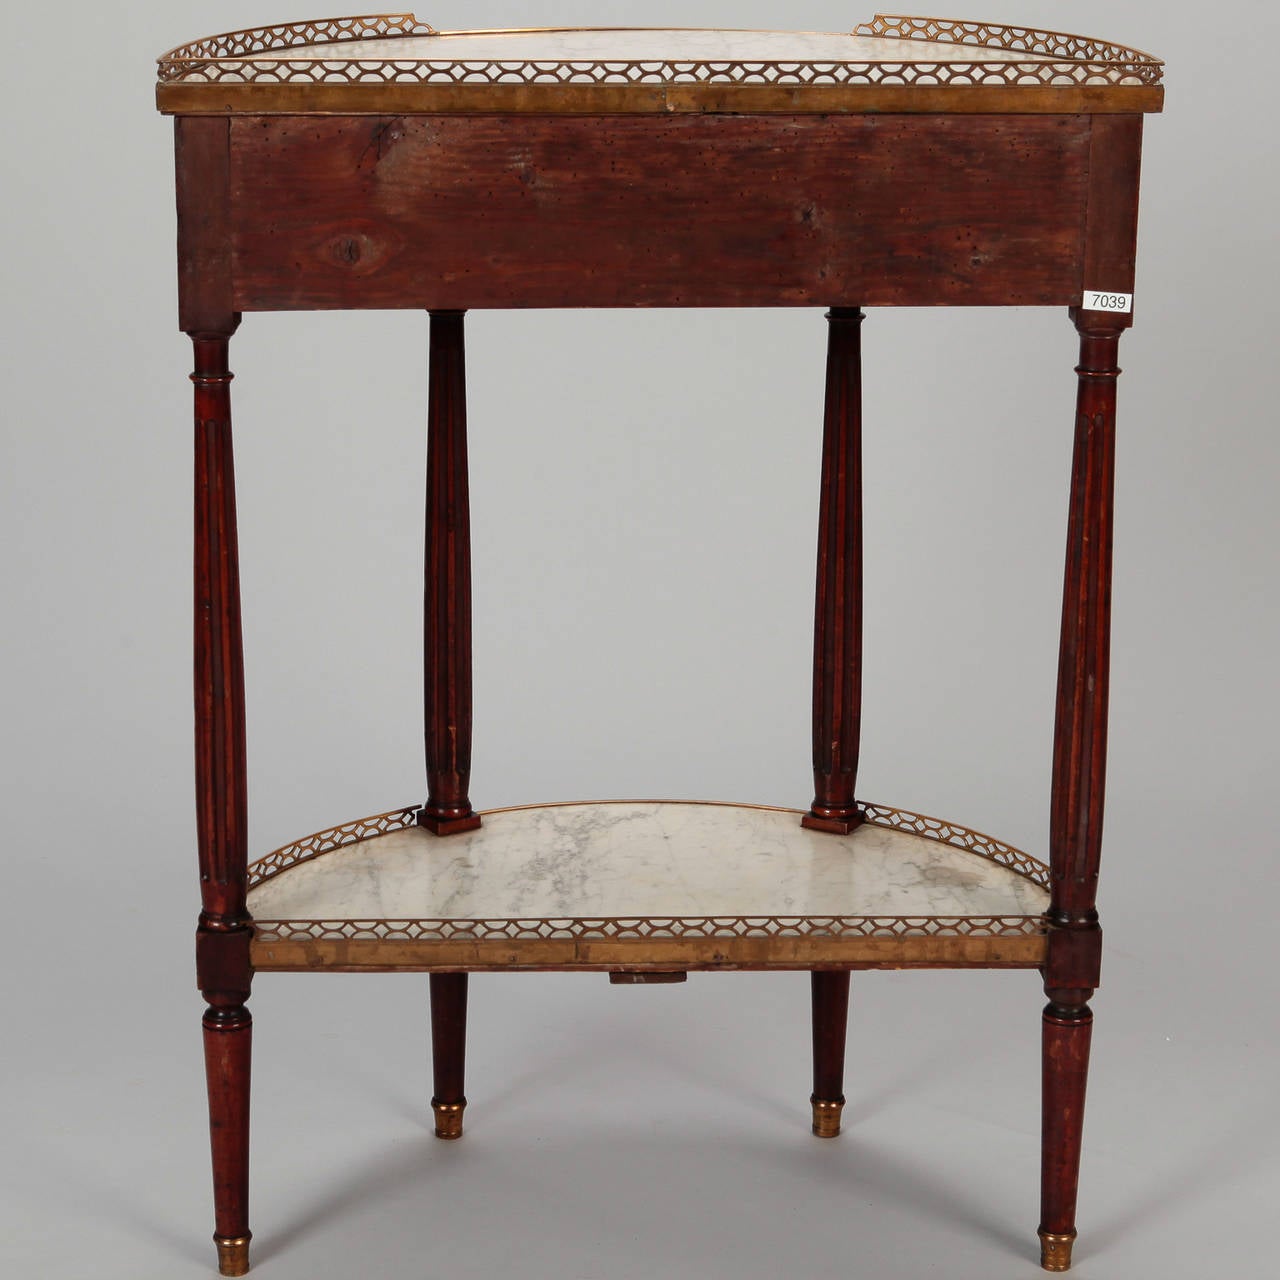 Early 20th Century Louis XVI Style Demilune Serving Table with Drawer and White Marble